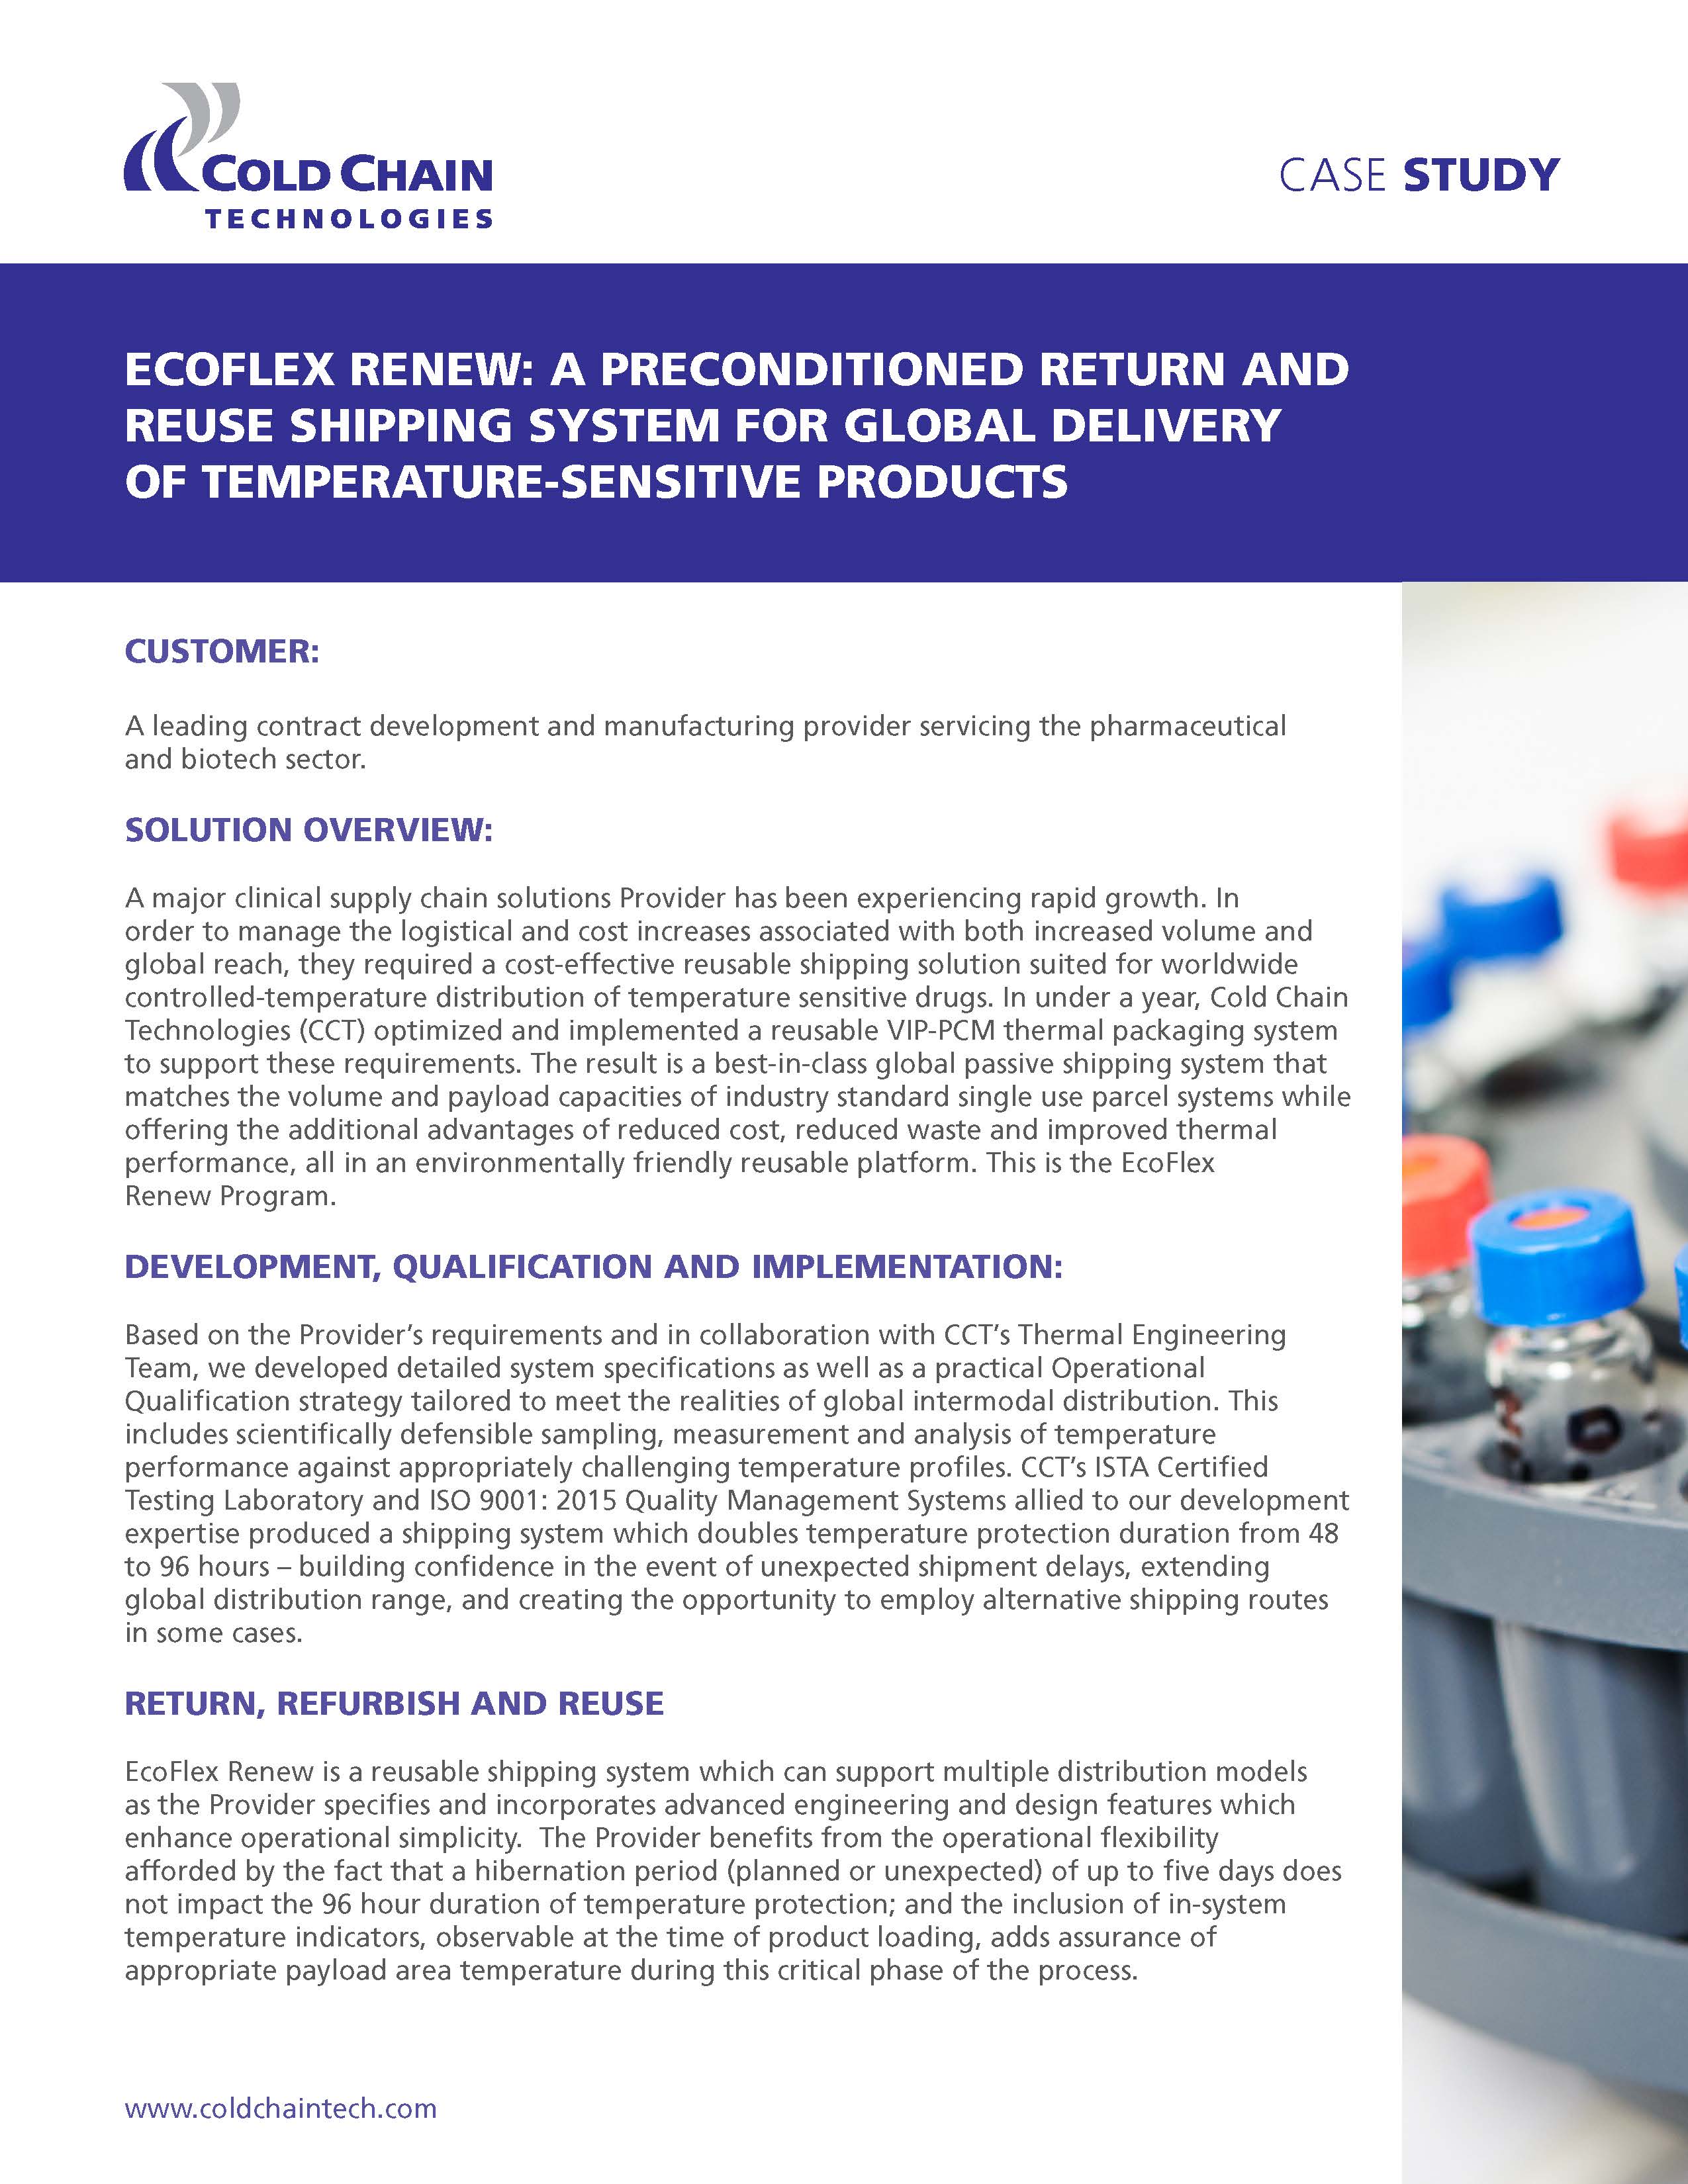 CCT-Case-Study-EcoFlex-ReNew-A-Preconditioned-Return-and-Reuse-Shipping-System-for-Global-Delivery-of-Temperature-Sensitive-Products_Page_1.jpg